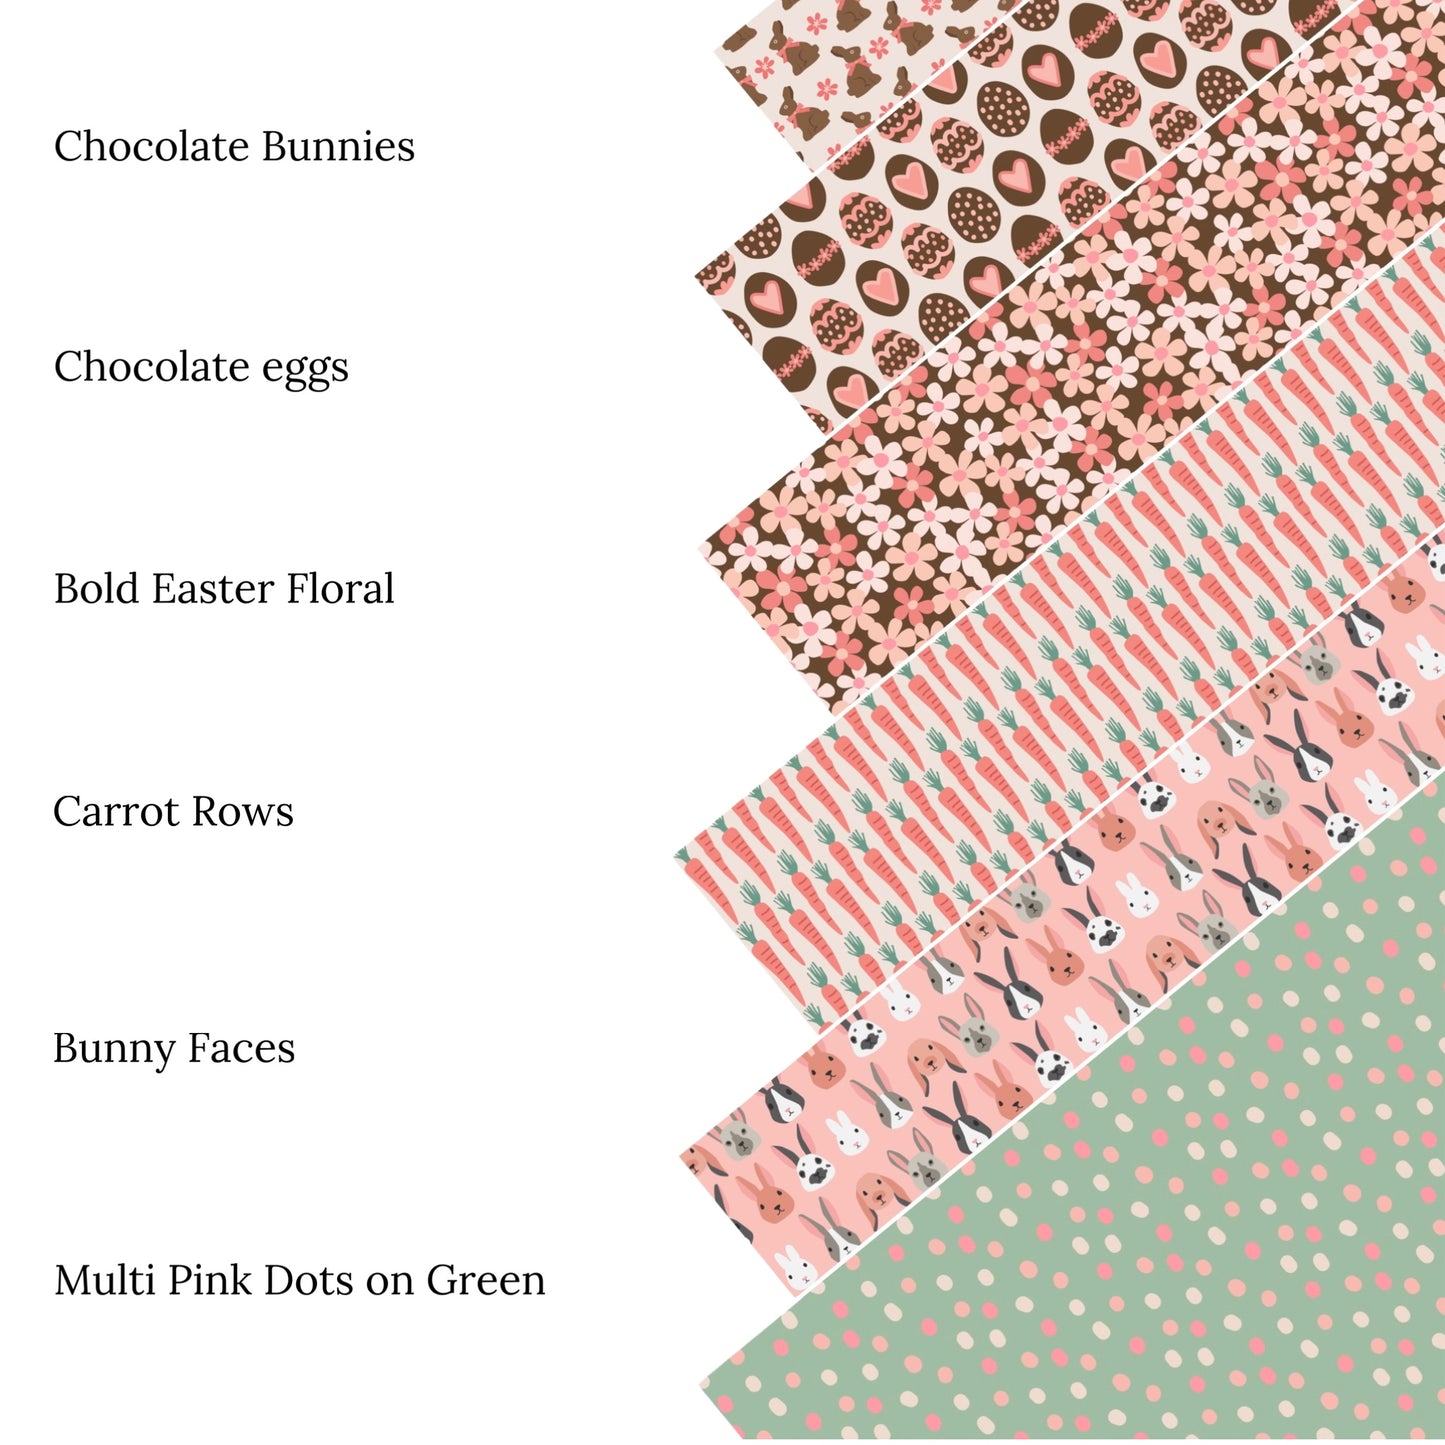 Chocolate Eggs Faux Leather Sheet